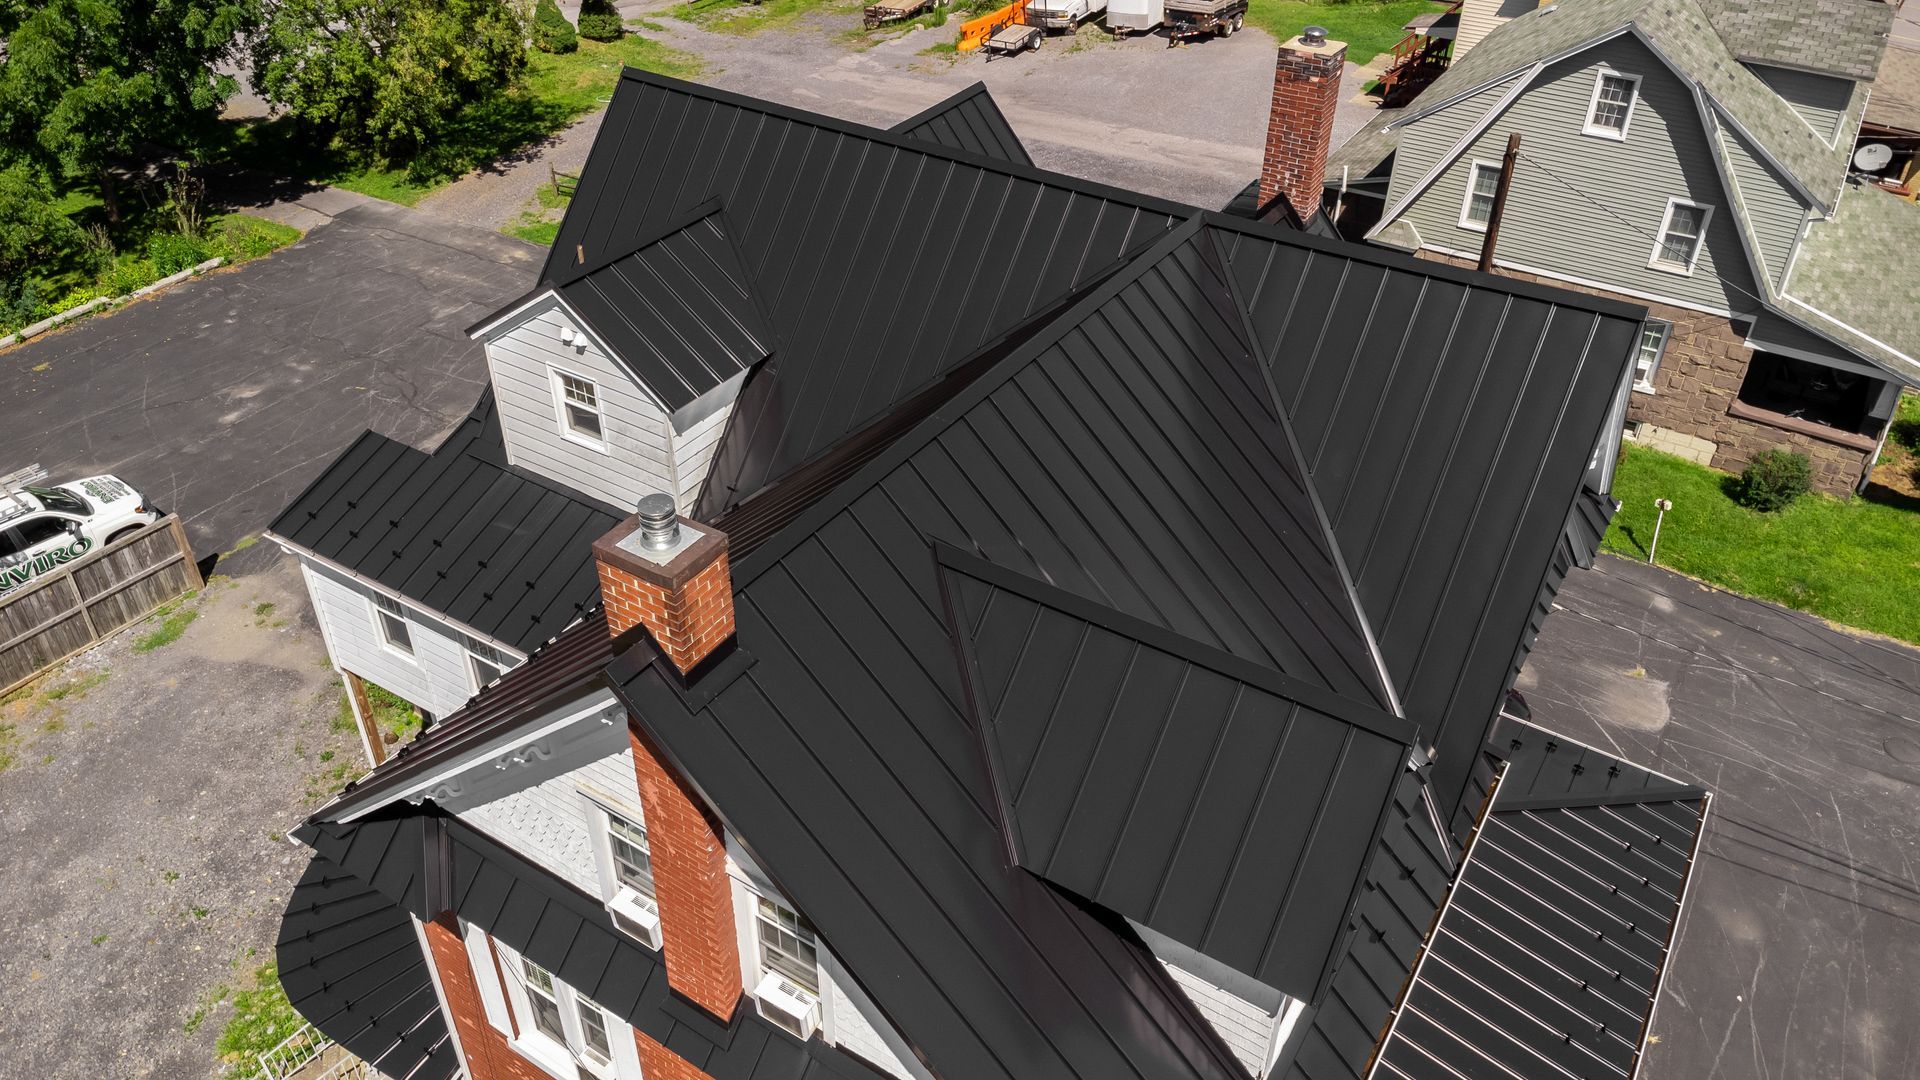 The best commercial roofing and residential roofing for standing seam metal roof in Central PA